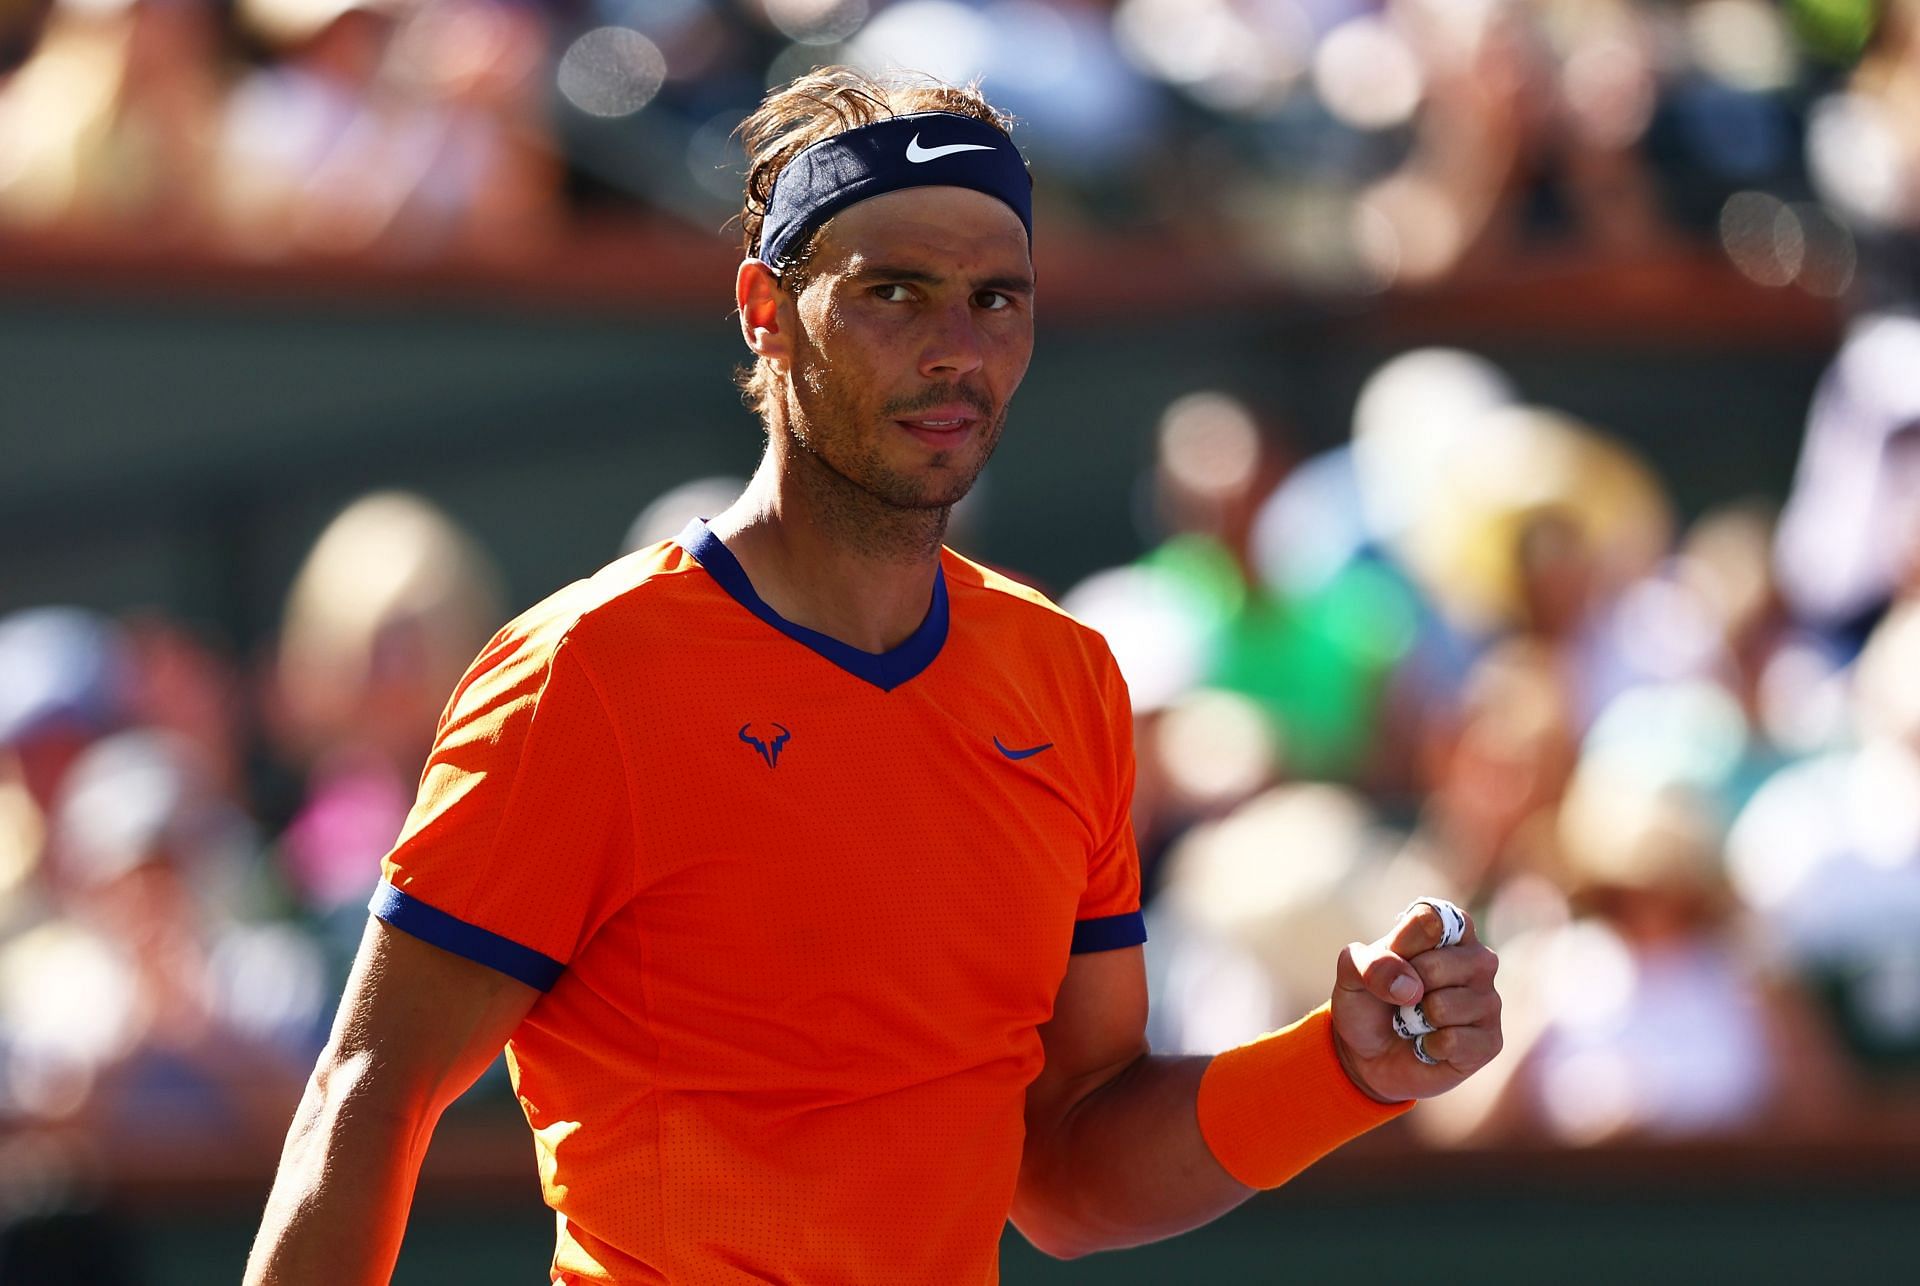 Rafael Nadal takes on Nick Kyrgios in the quarterfinals of the 2022 Indian Wells Masters